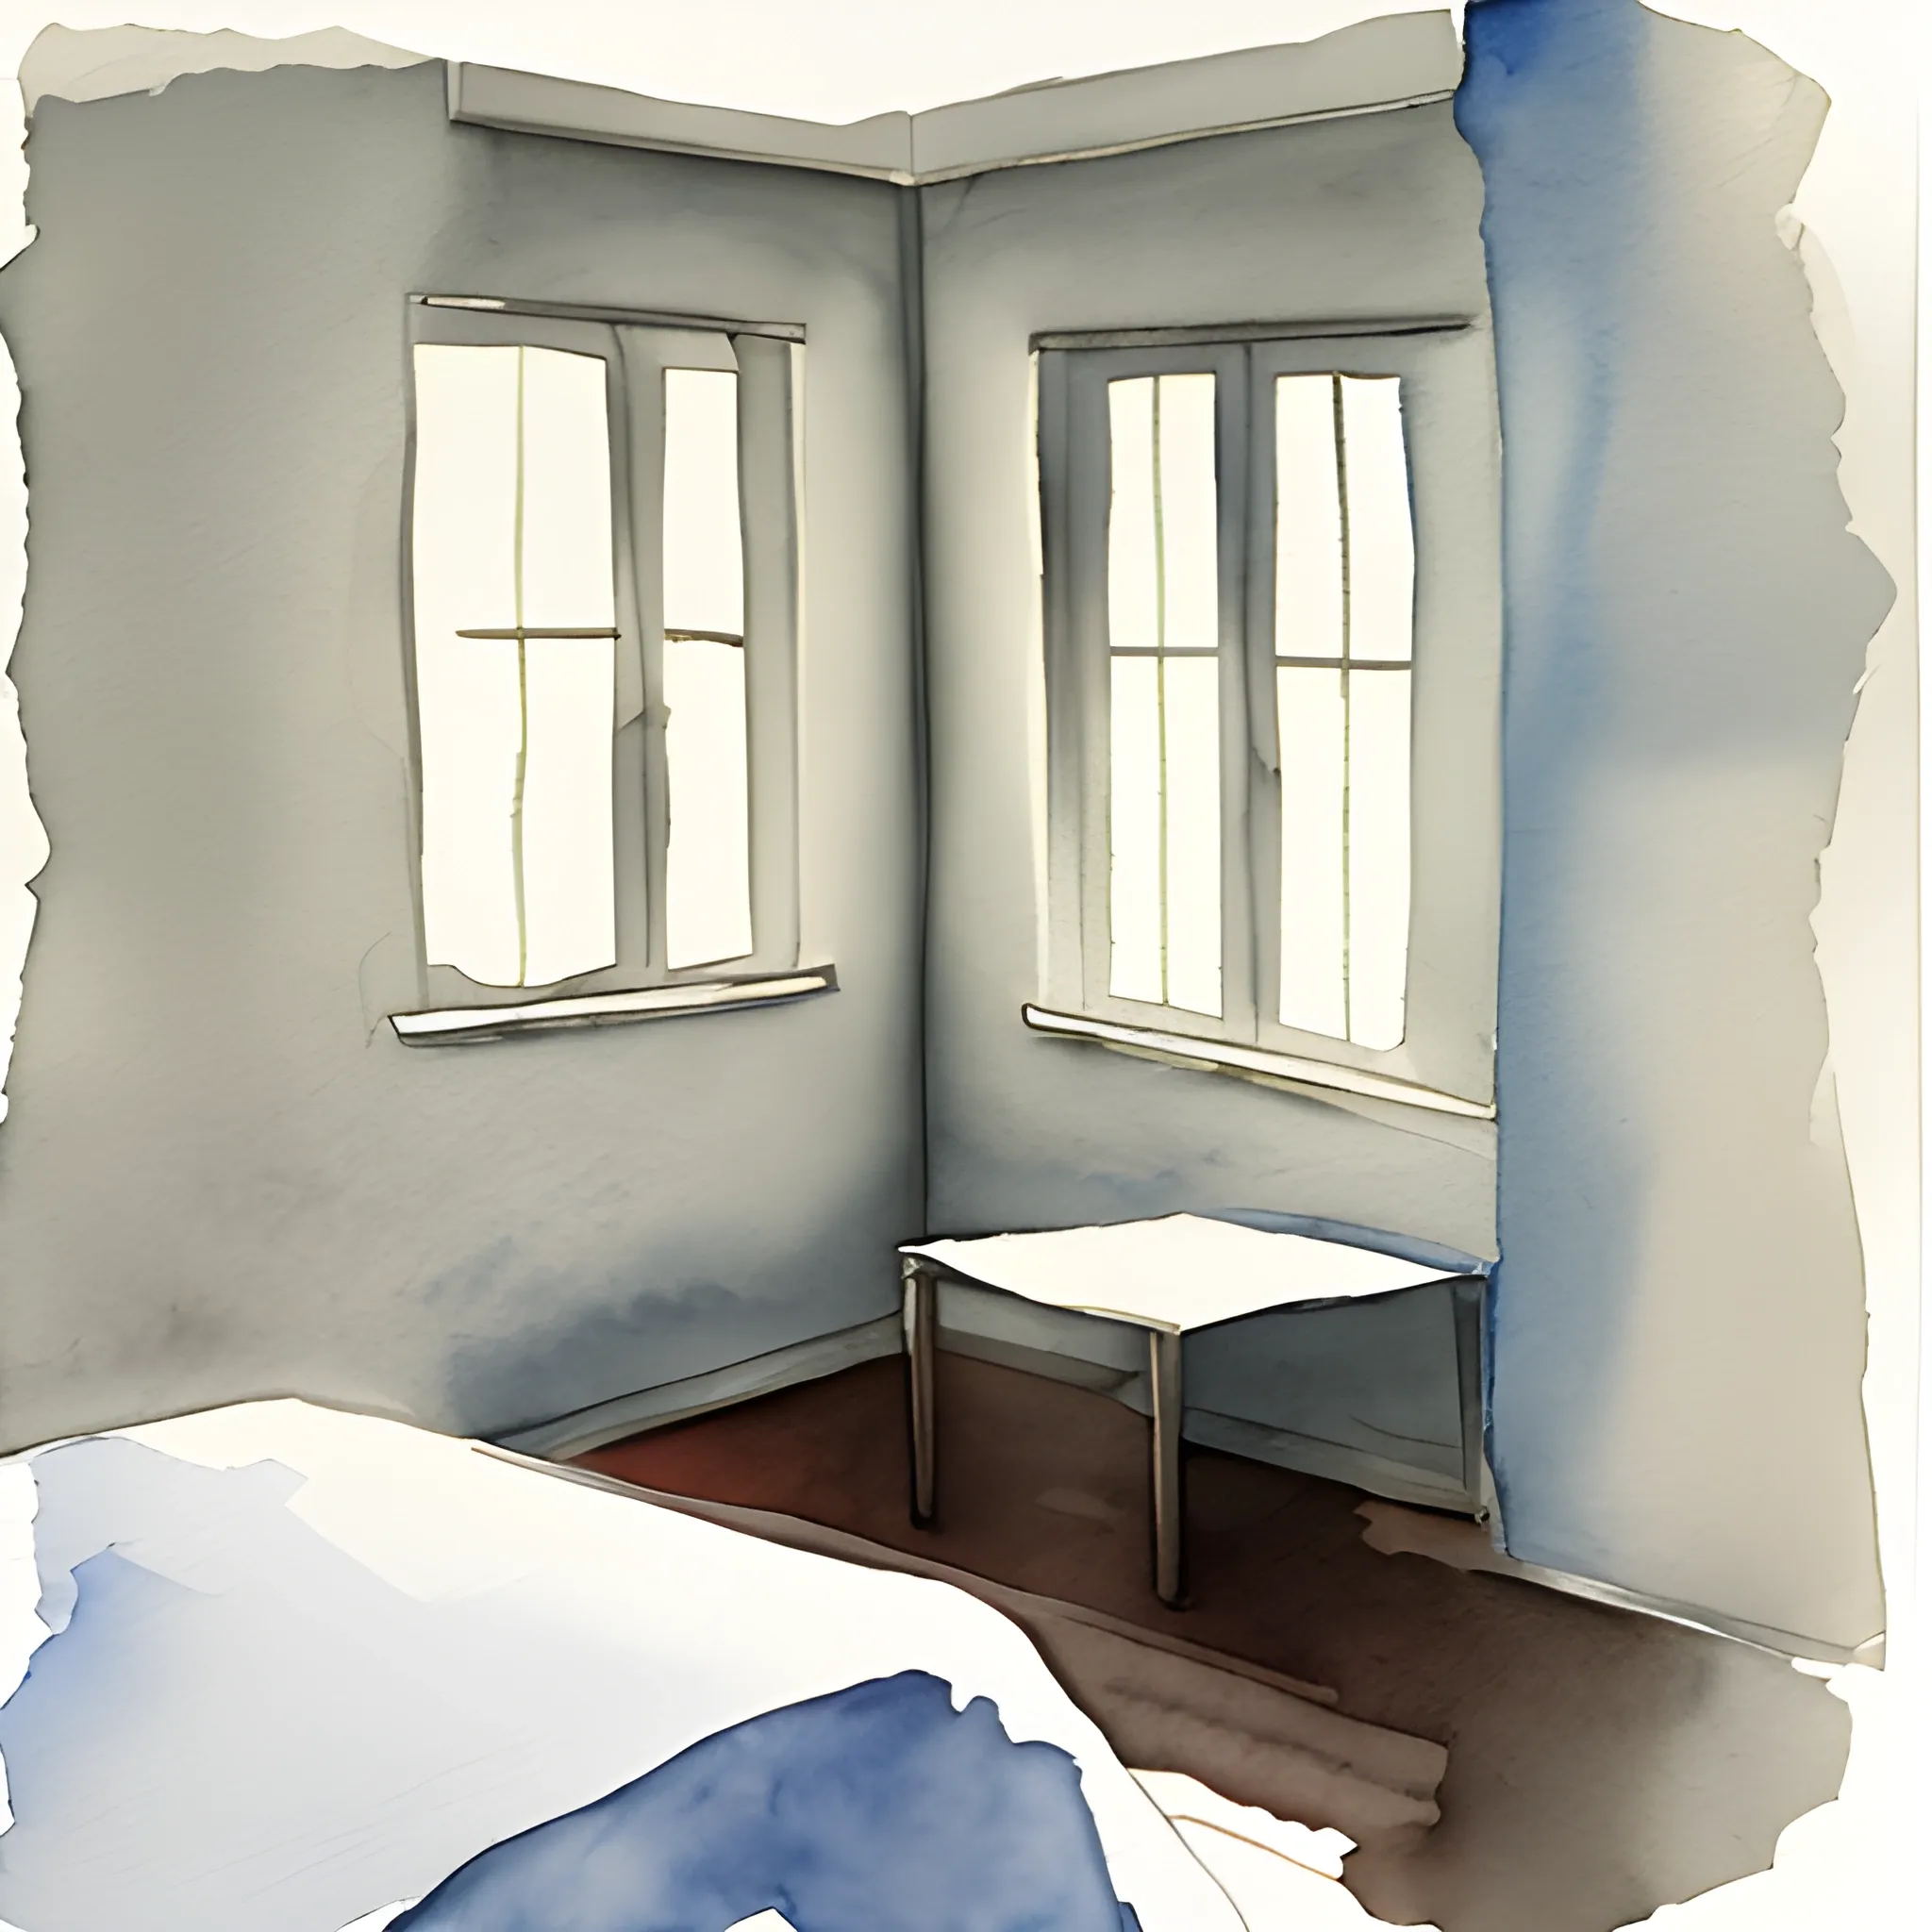 A room, a white shirt, and me, Water Color